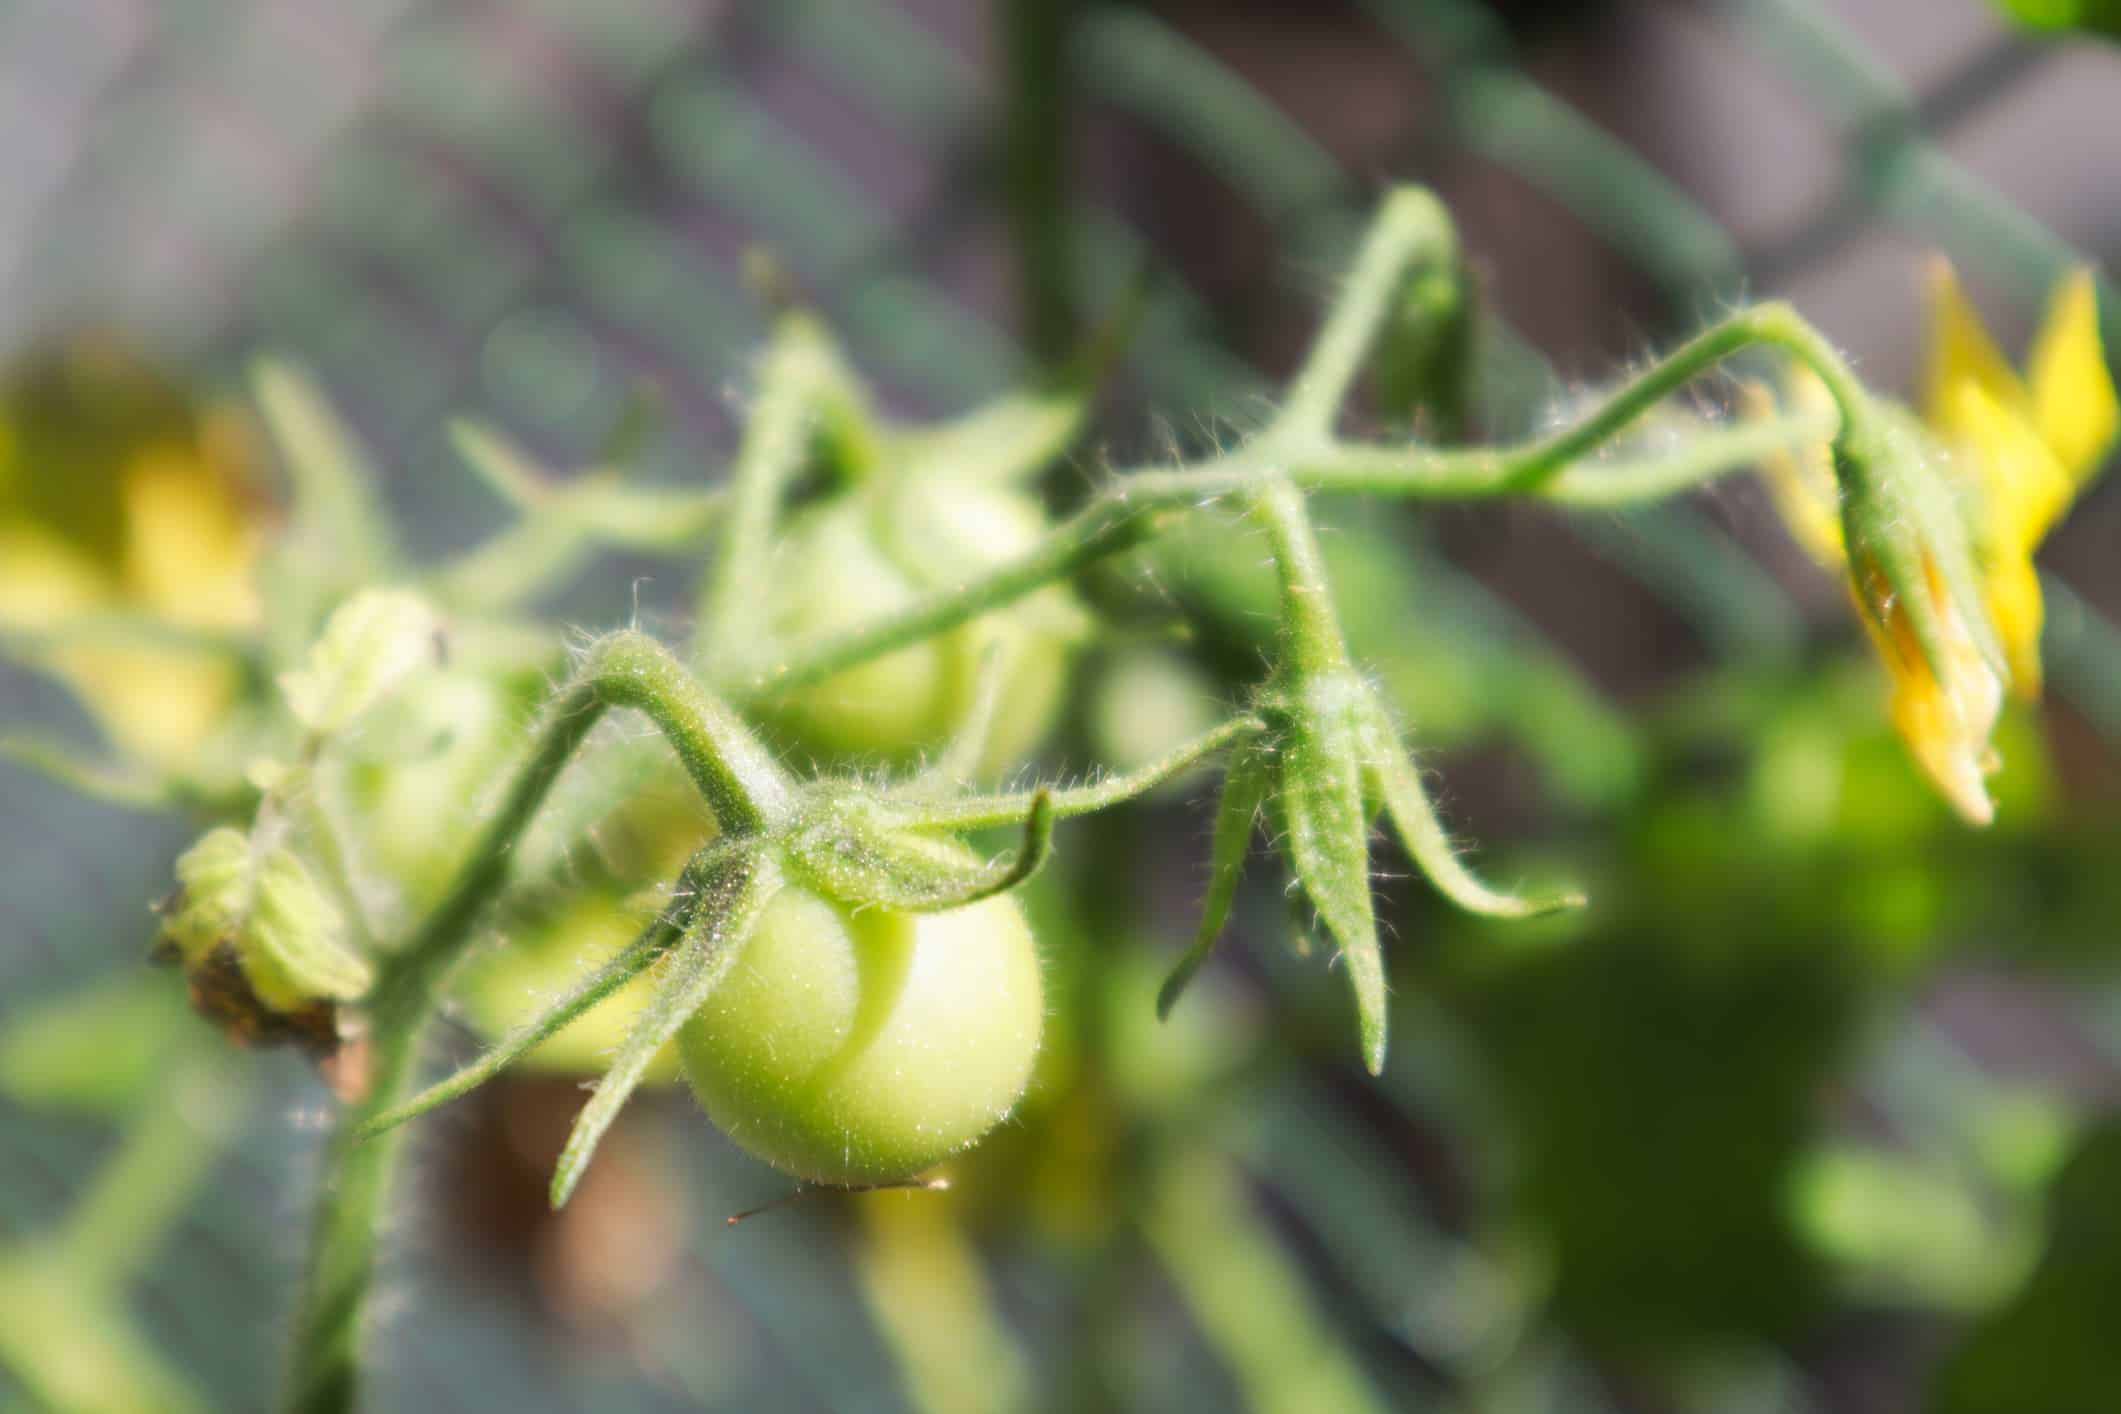 How to grow tomatoes in Oregon